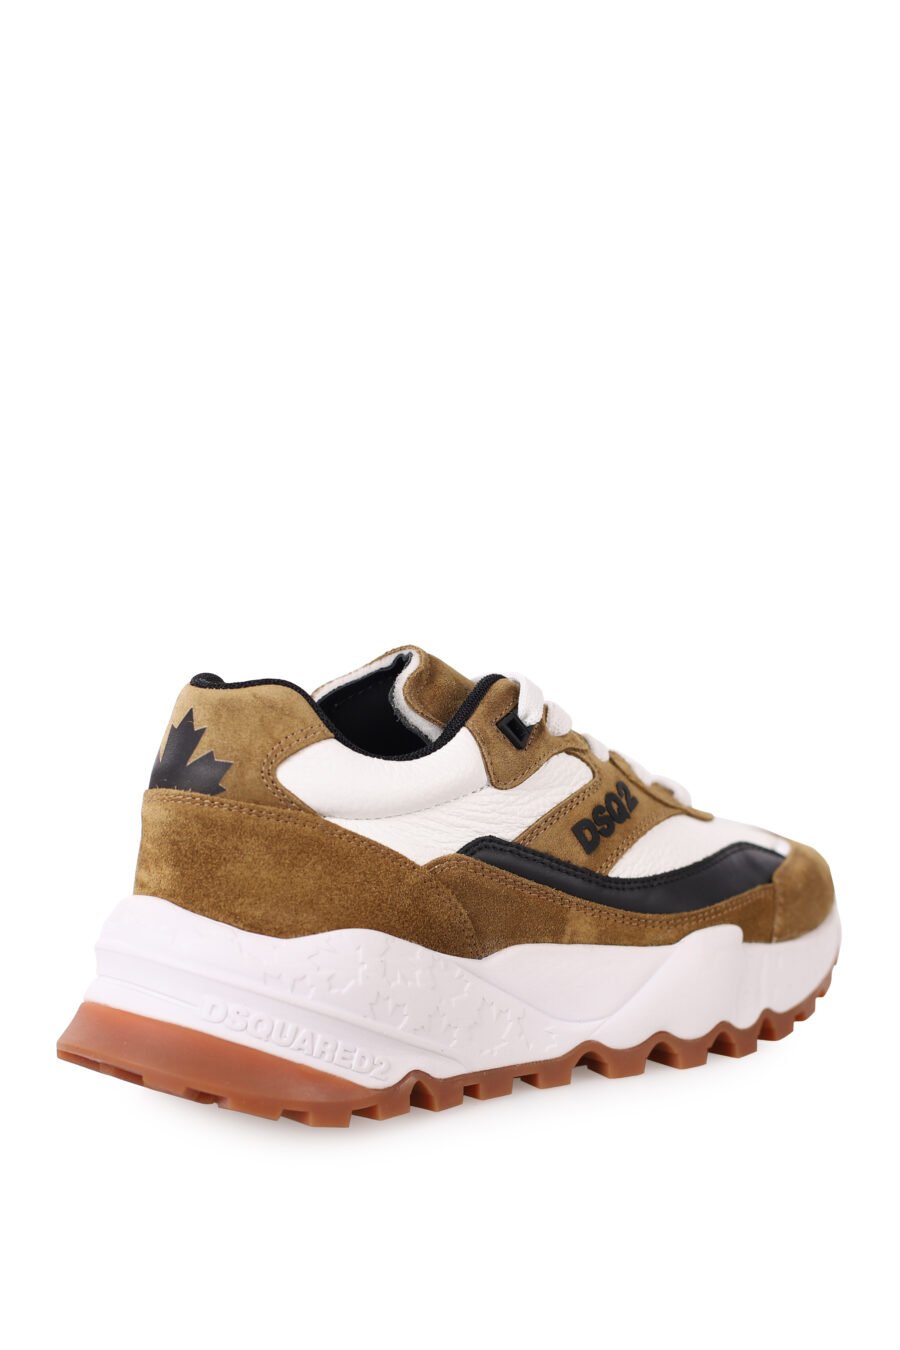 Camel coloured trainers with Dsq2" logo and black and white details - IMG 0362